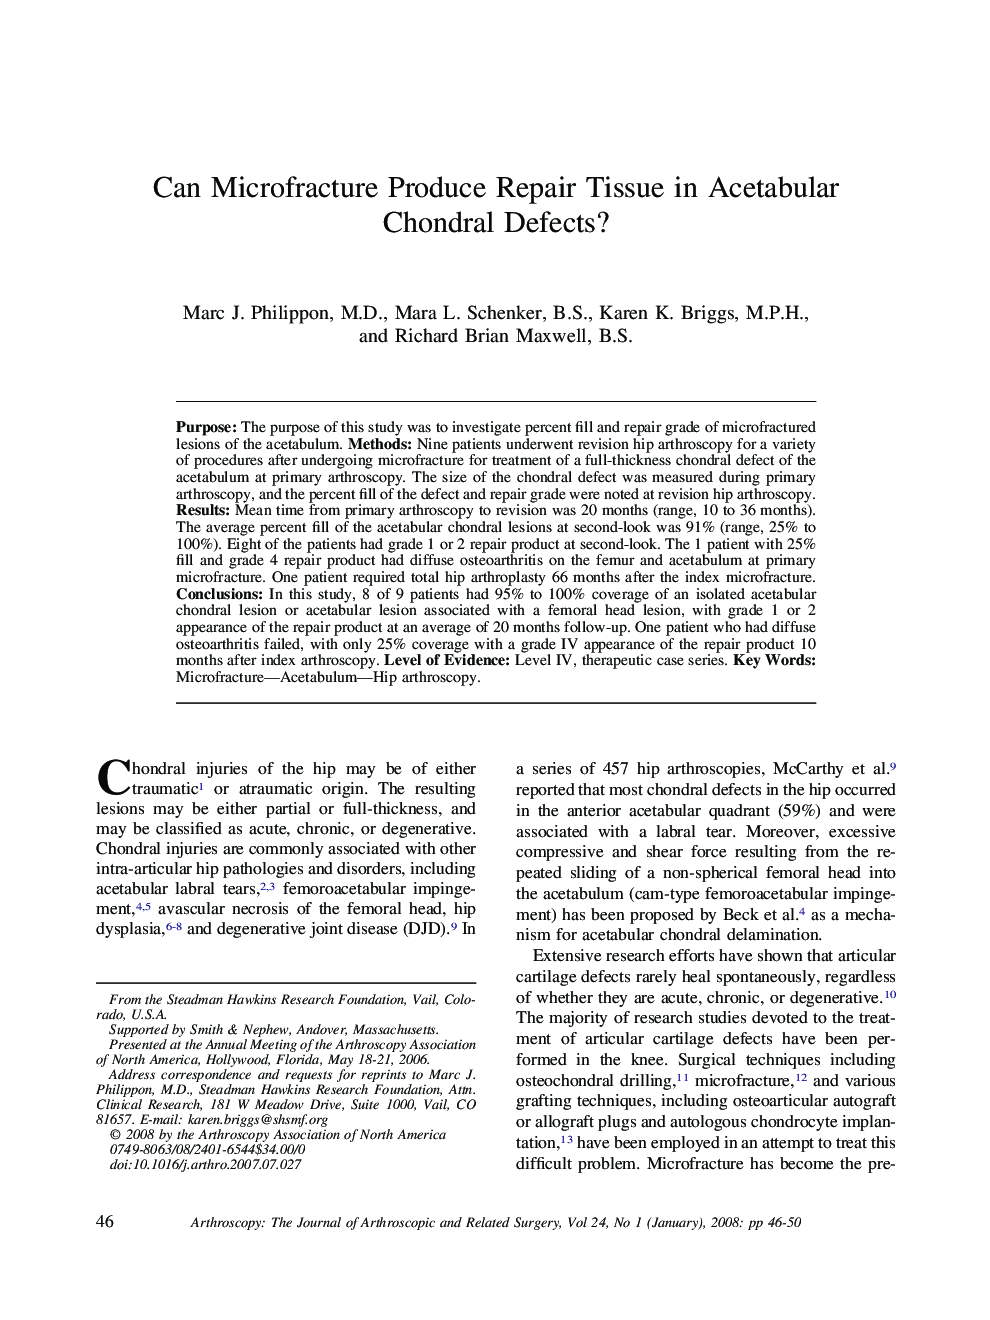 Can Microfracture Produce Repair Tissue in Acetabular Chondral Defects? 